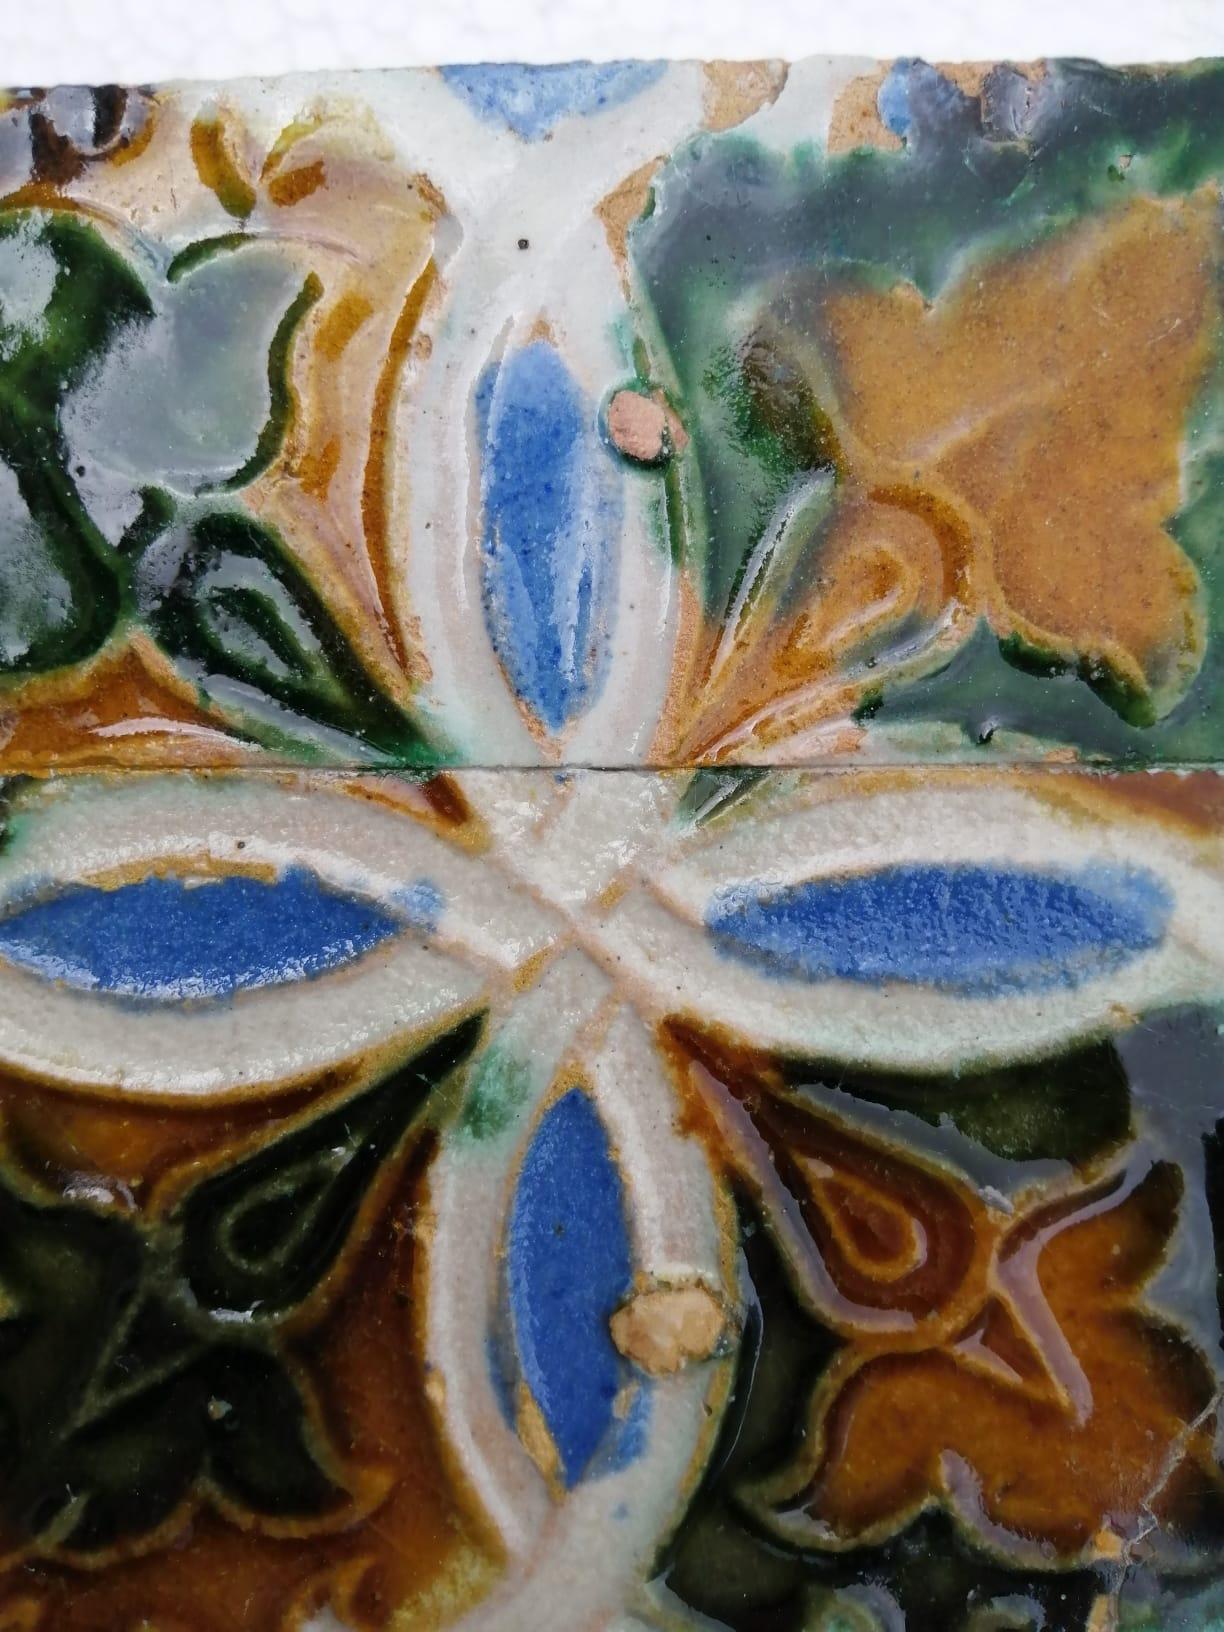 The word azulejo is derived from the Arabic ?????? (az-zulayj): zellige, meaning polished
stone. The original idea was to imitate the Byzantine and Roman mosaics. This
origin shows the unmistakable Arab influences in many tiles: interlocking